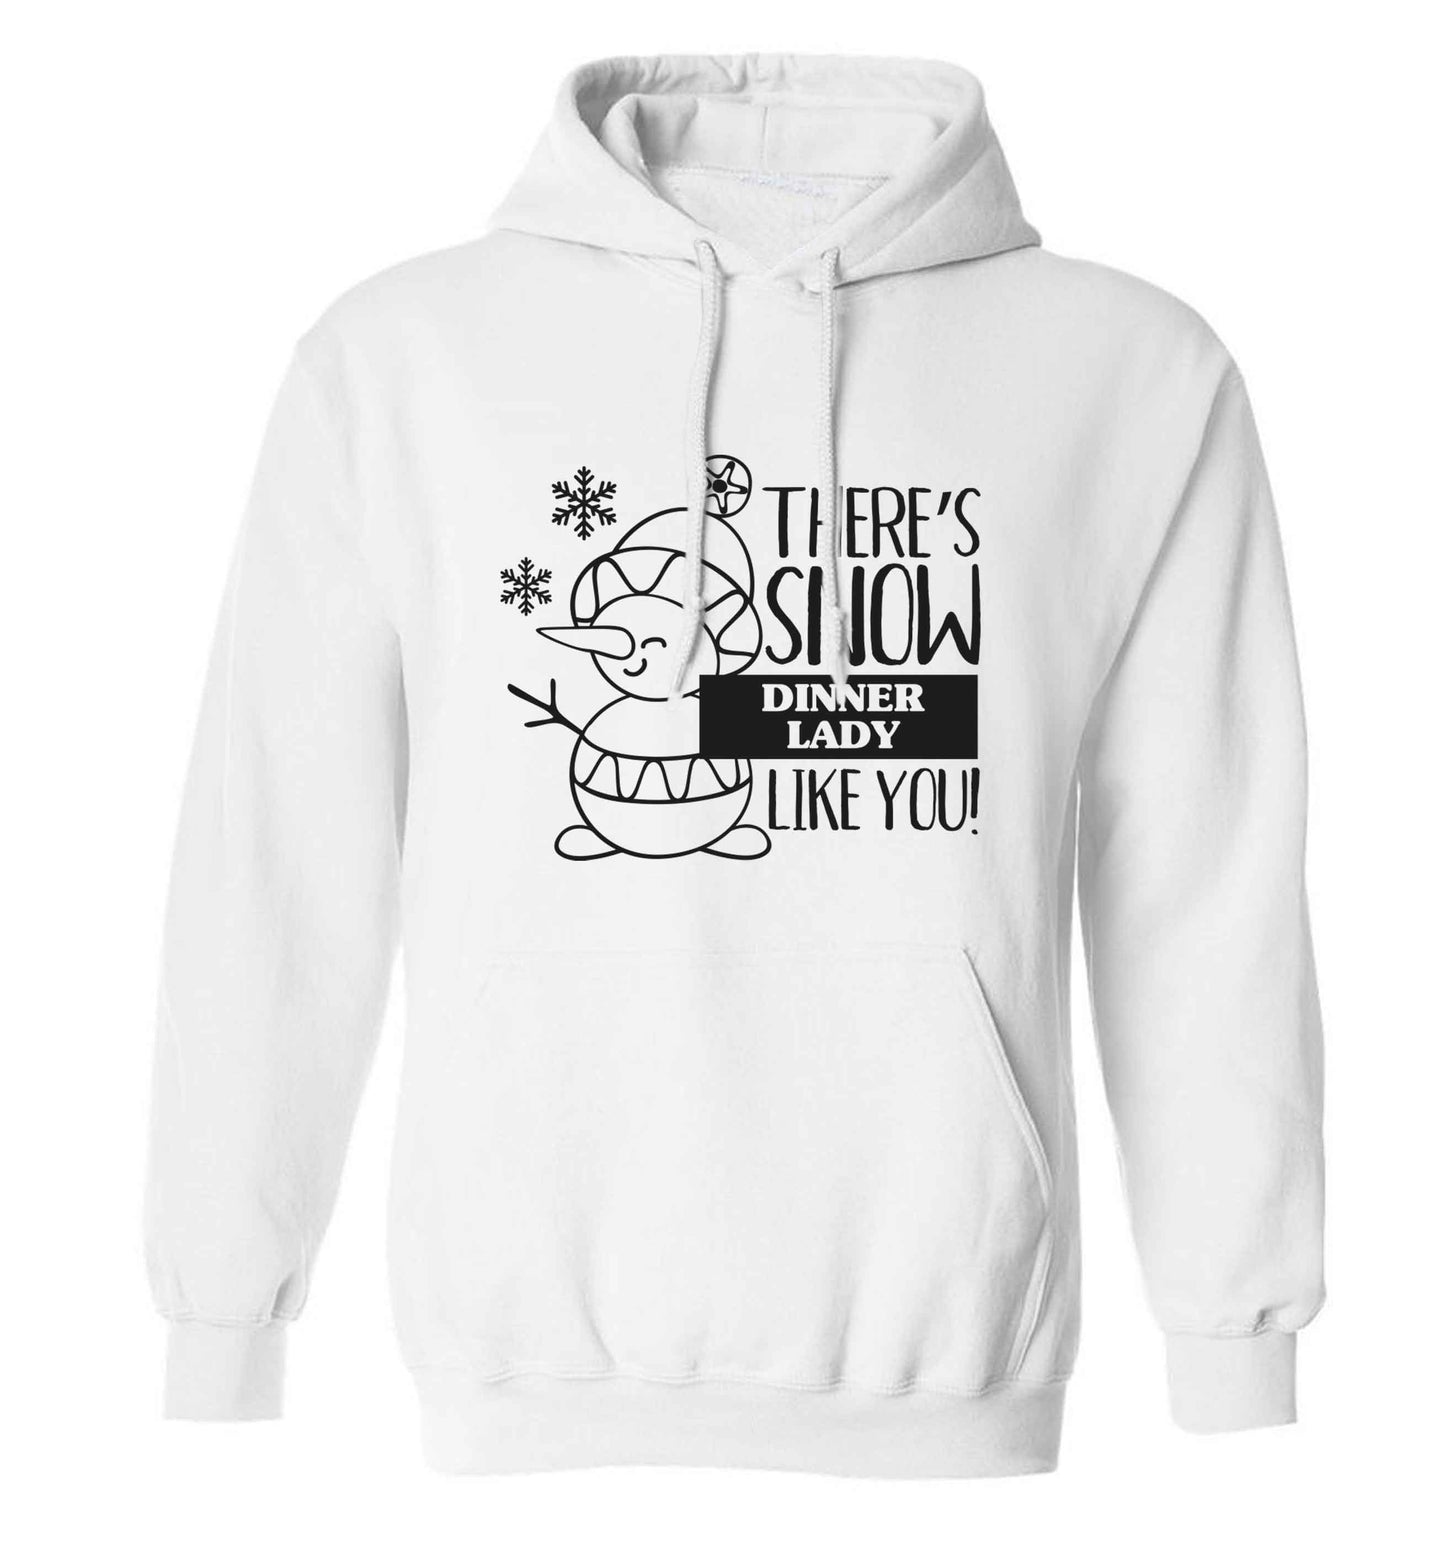 There's snow dinner lady like you adults unisex white hoodie 2XL